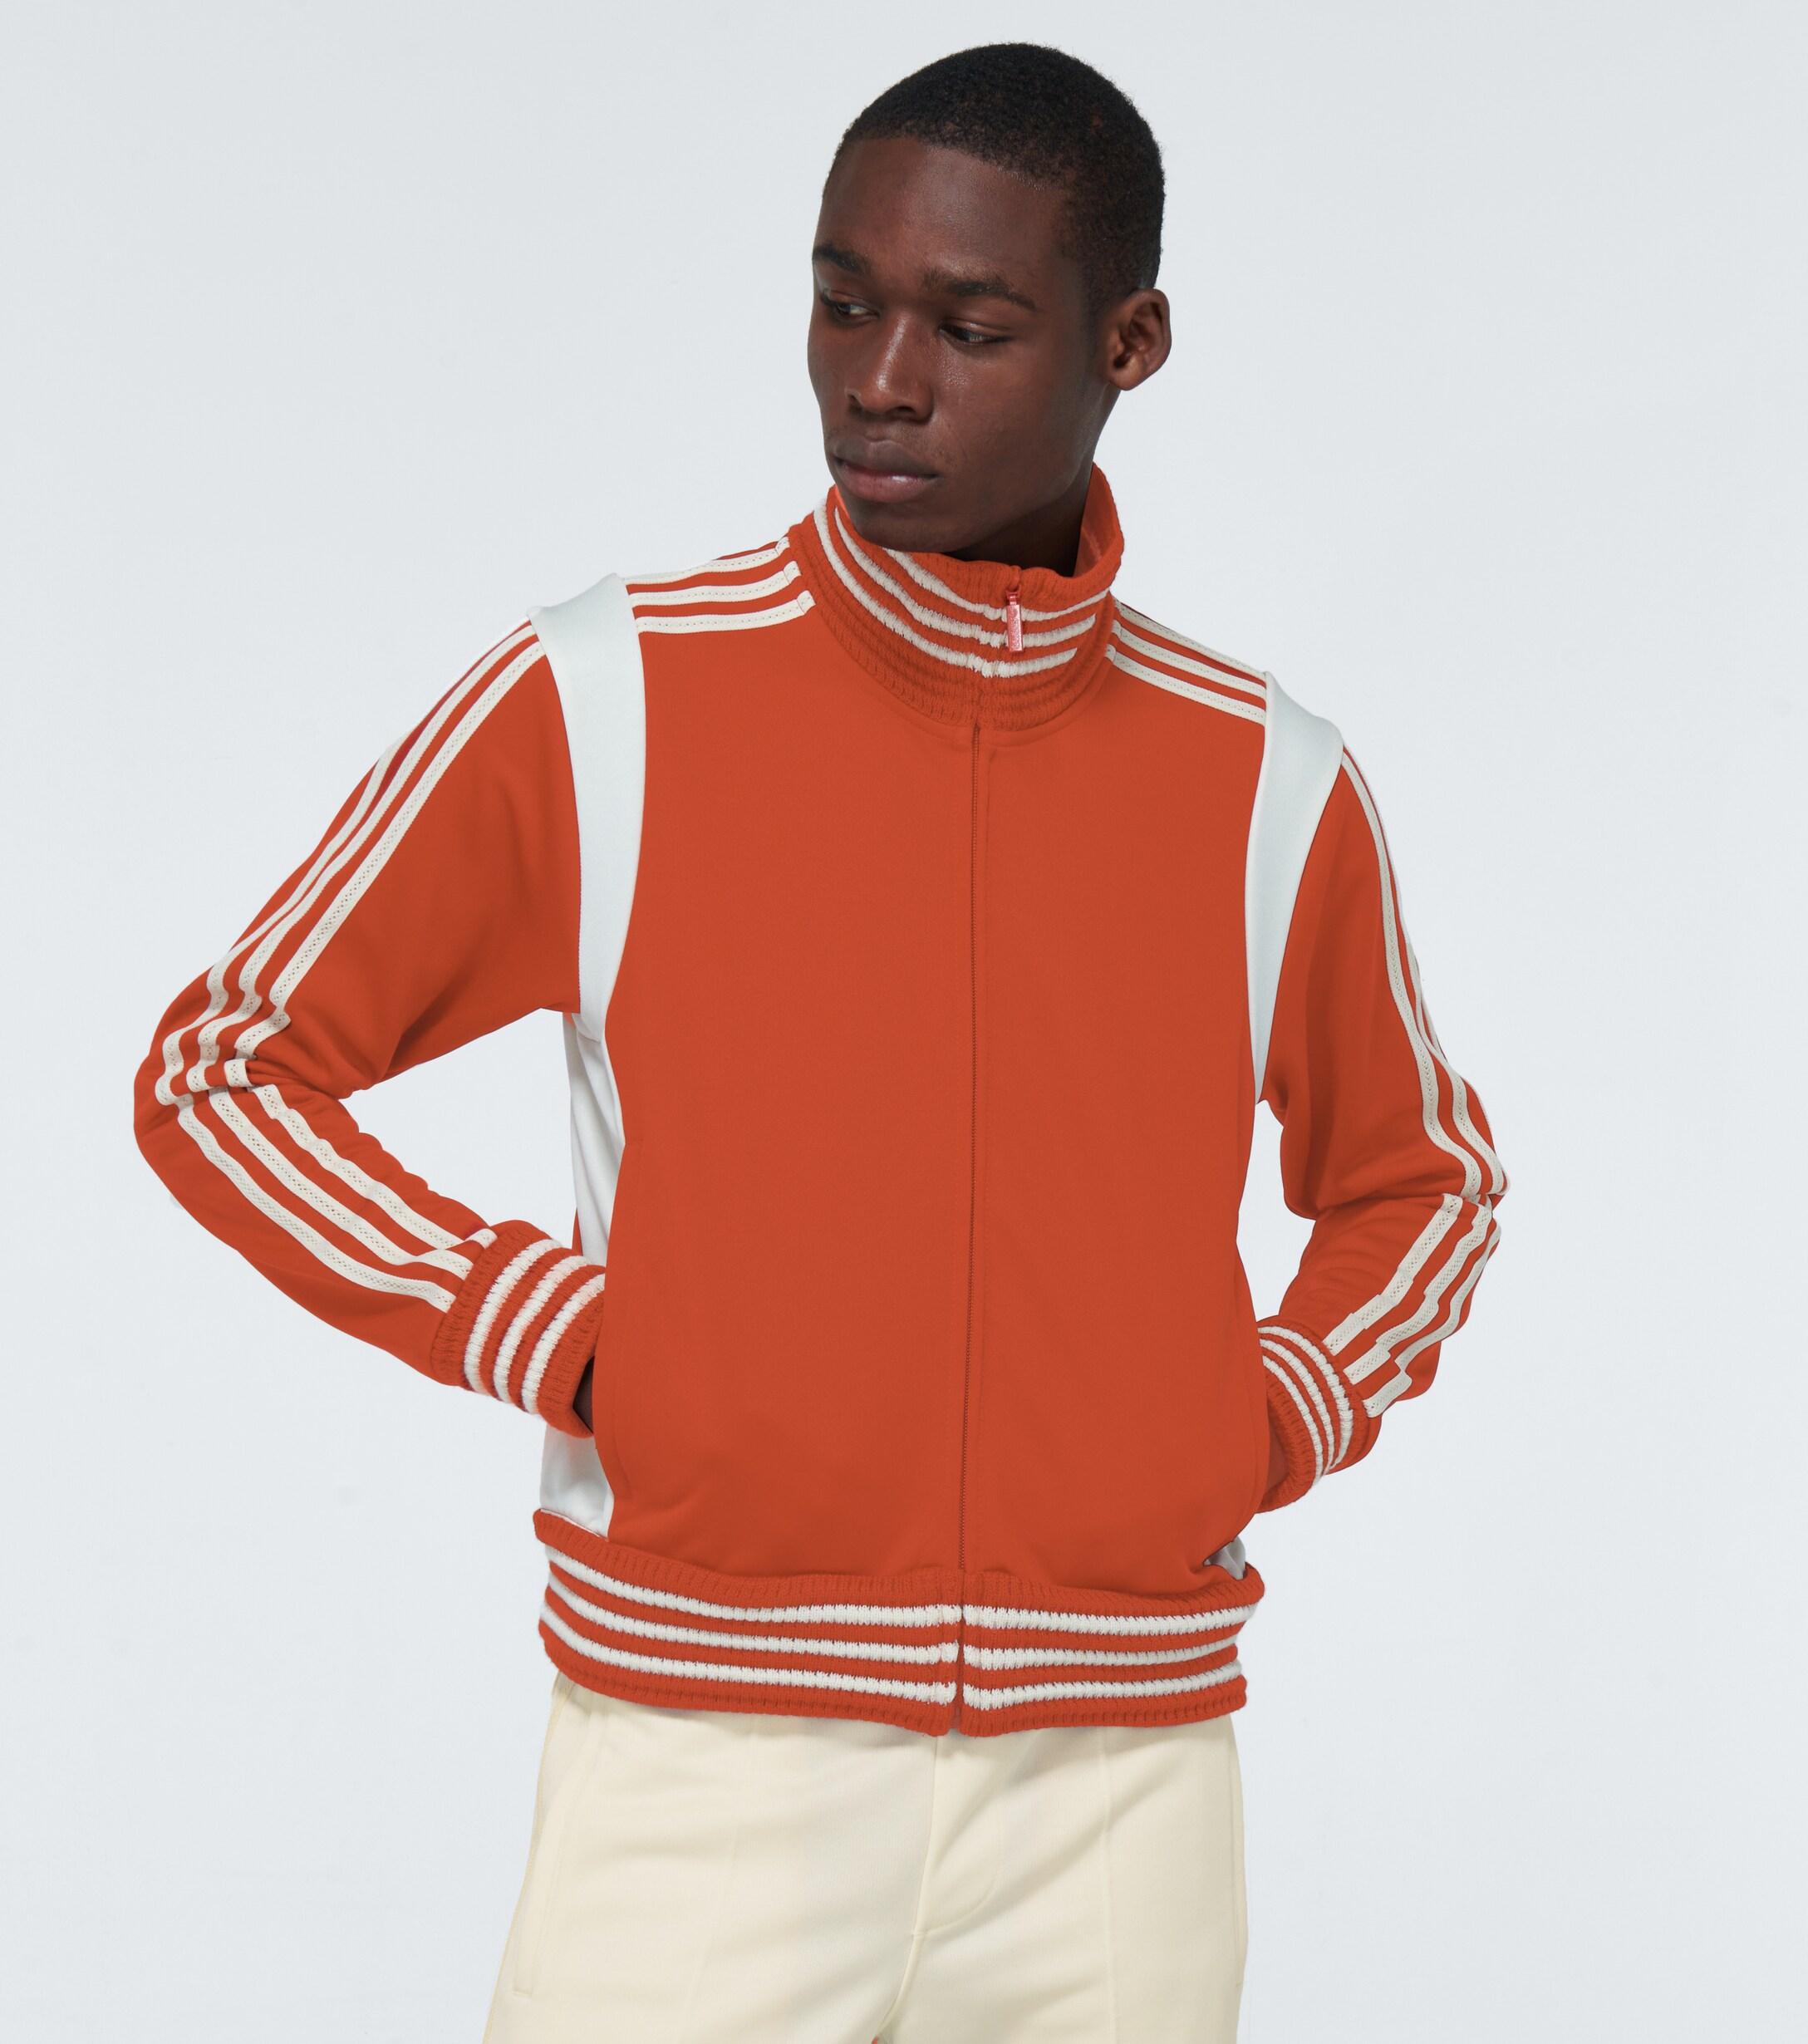 ADIDAS WALES BONNER LOVERS TRACK TOP-